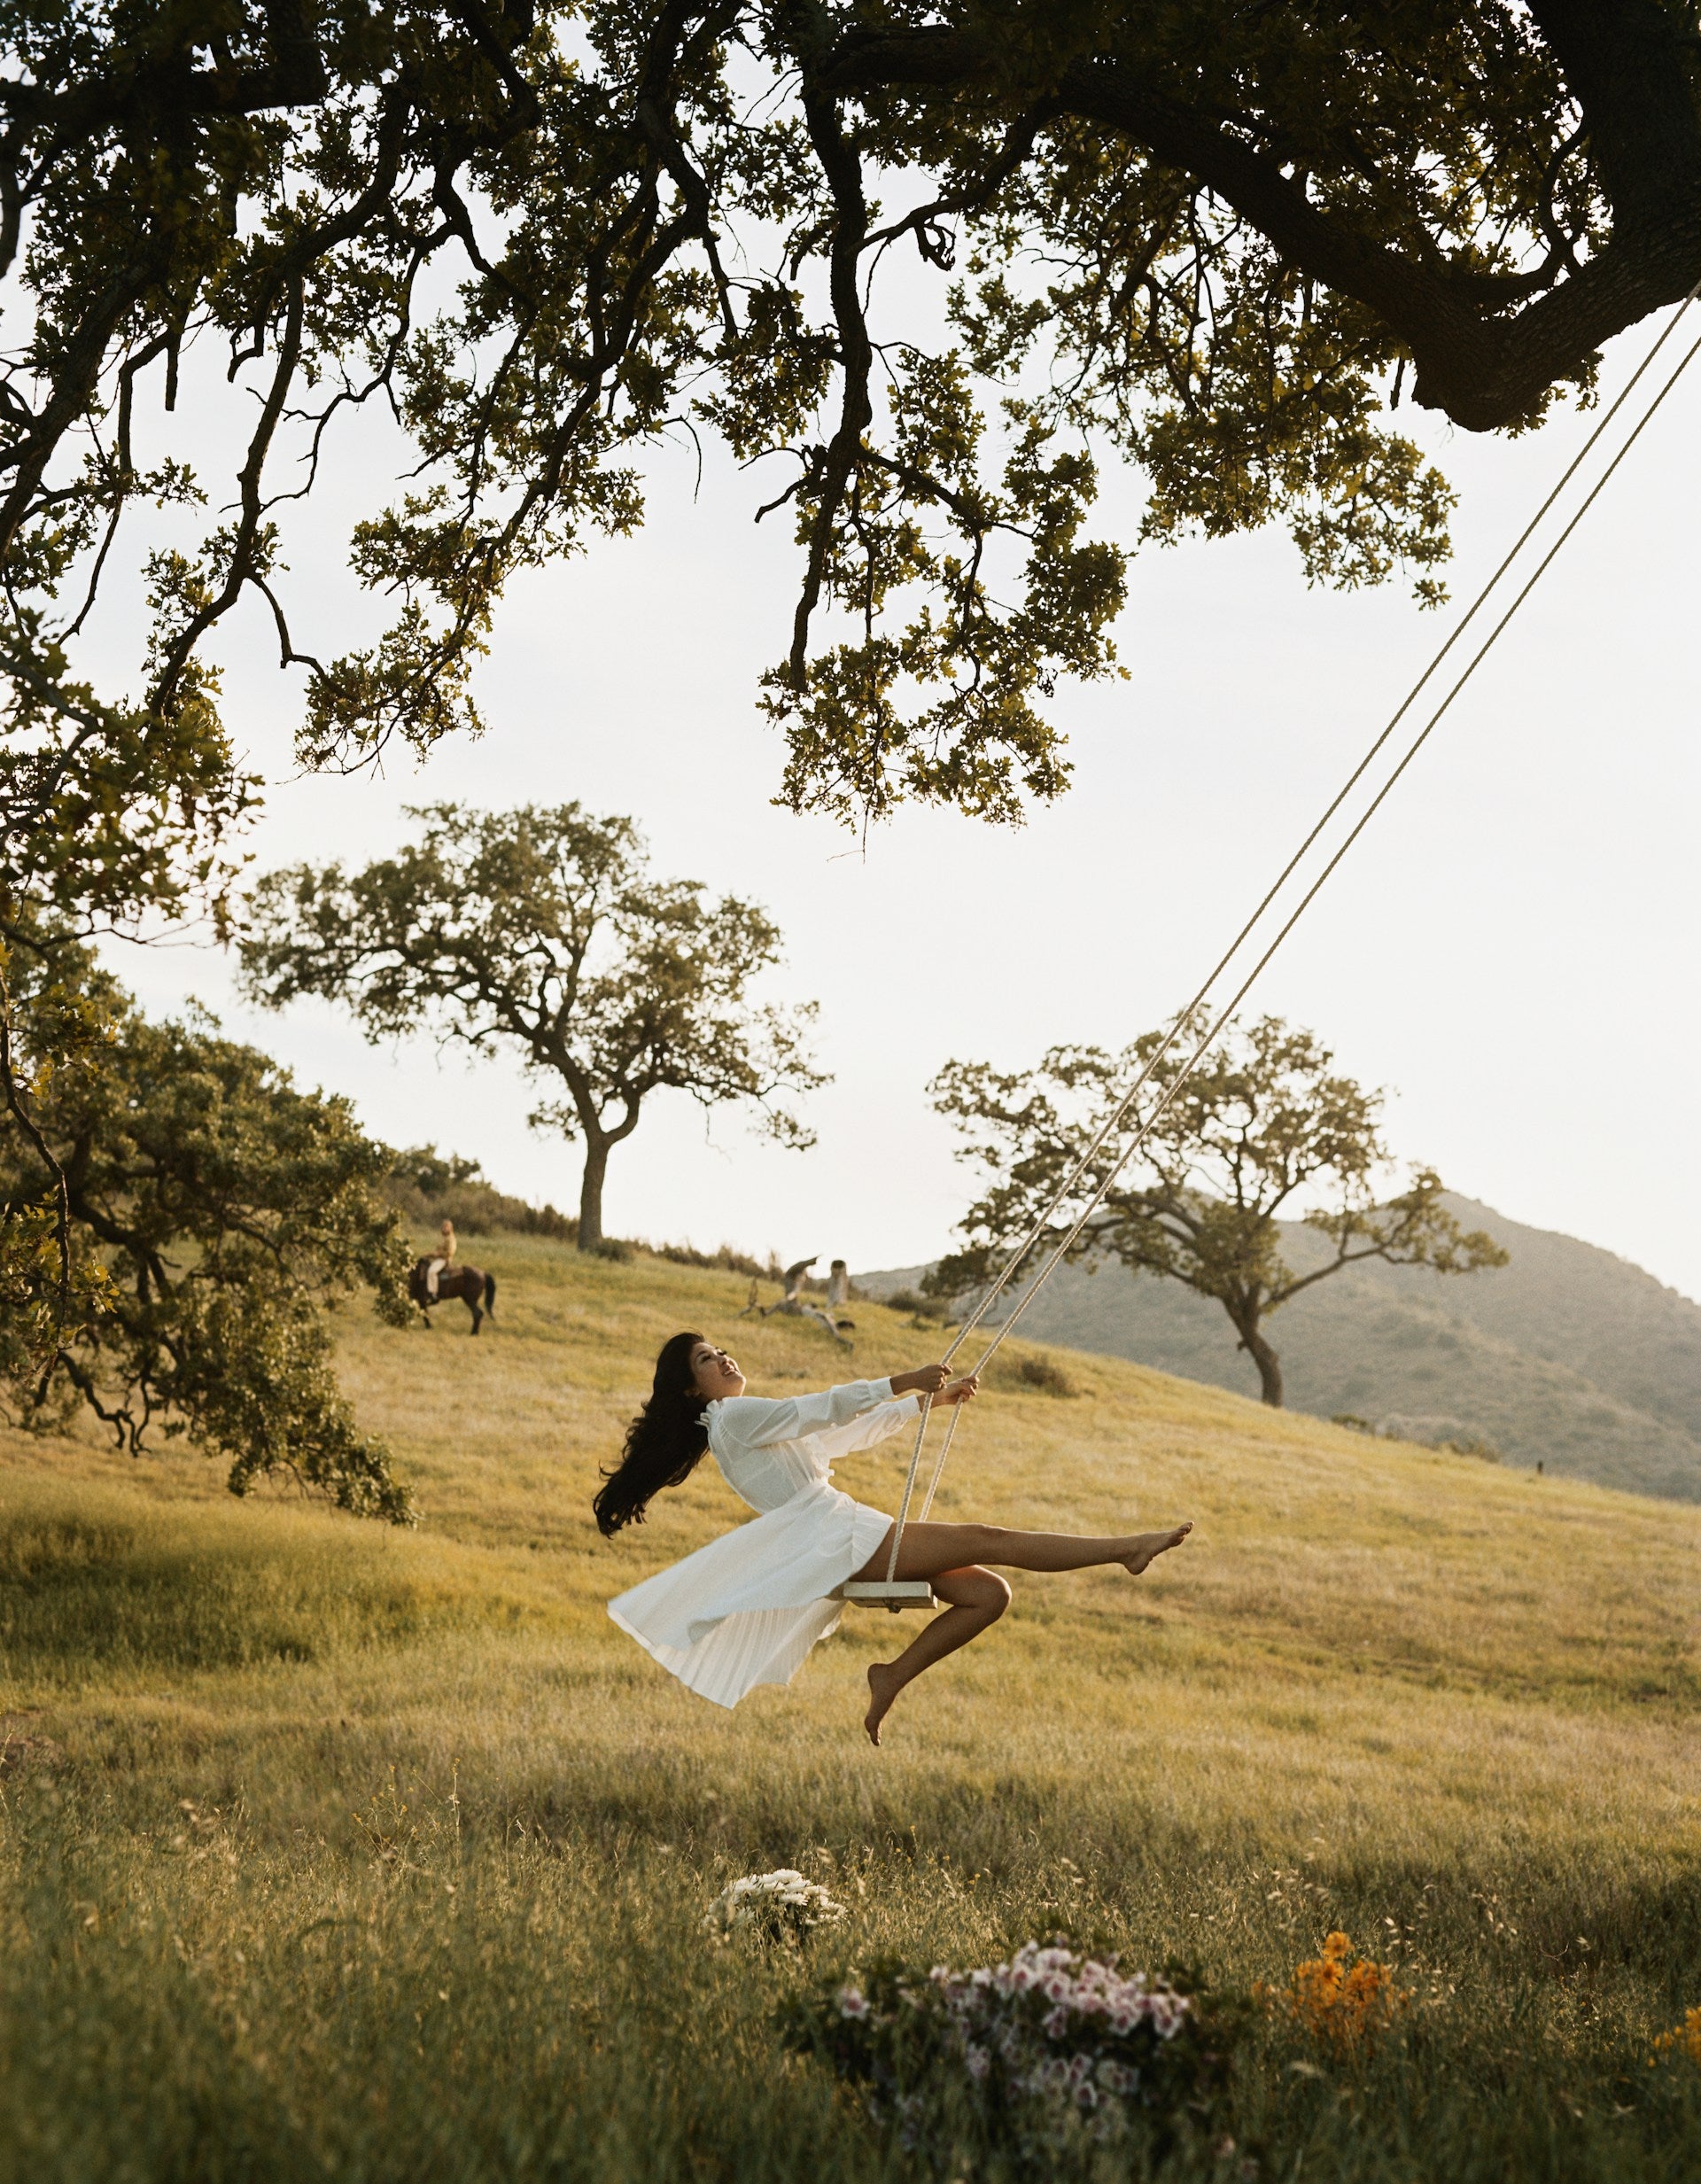 A smiling young woman in a white dress on a swing outside